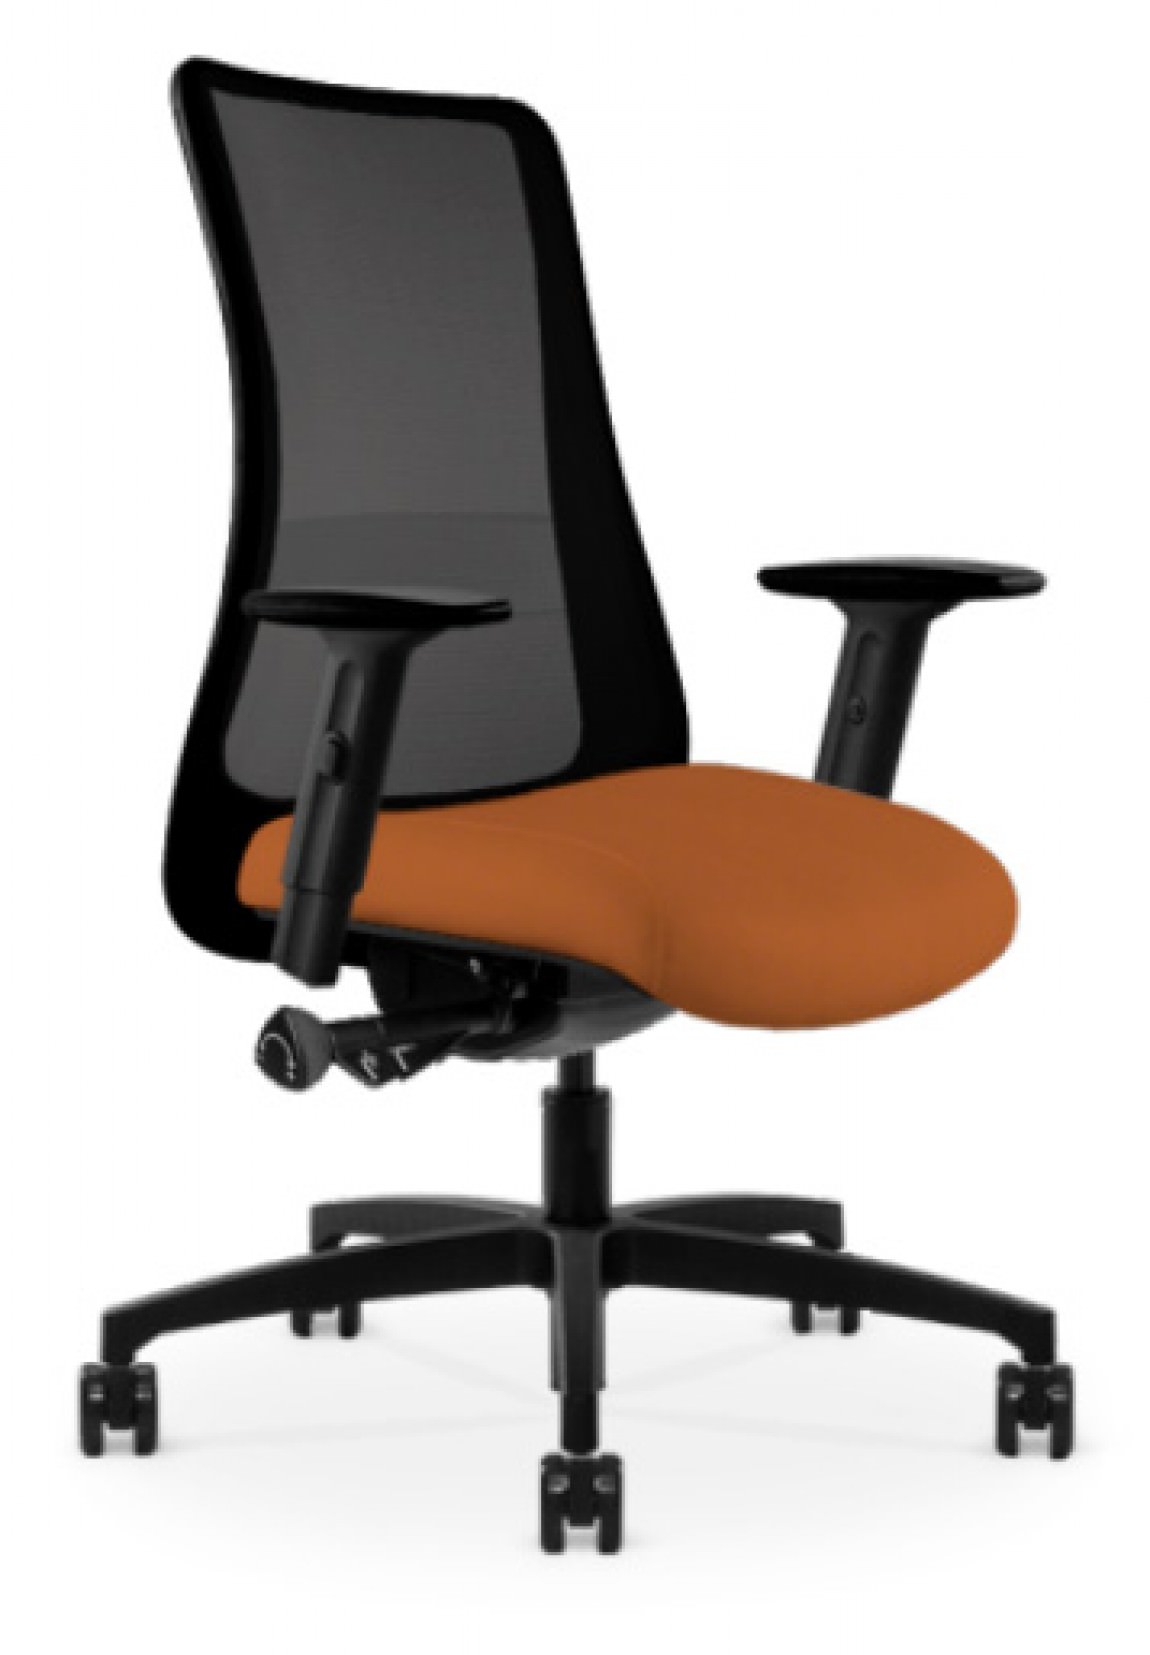 Black Copper Mesh Antimicrobial Office Chair w/ Butterscotch Seat